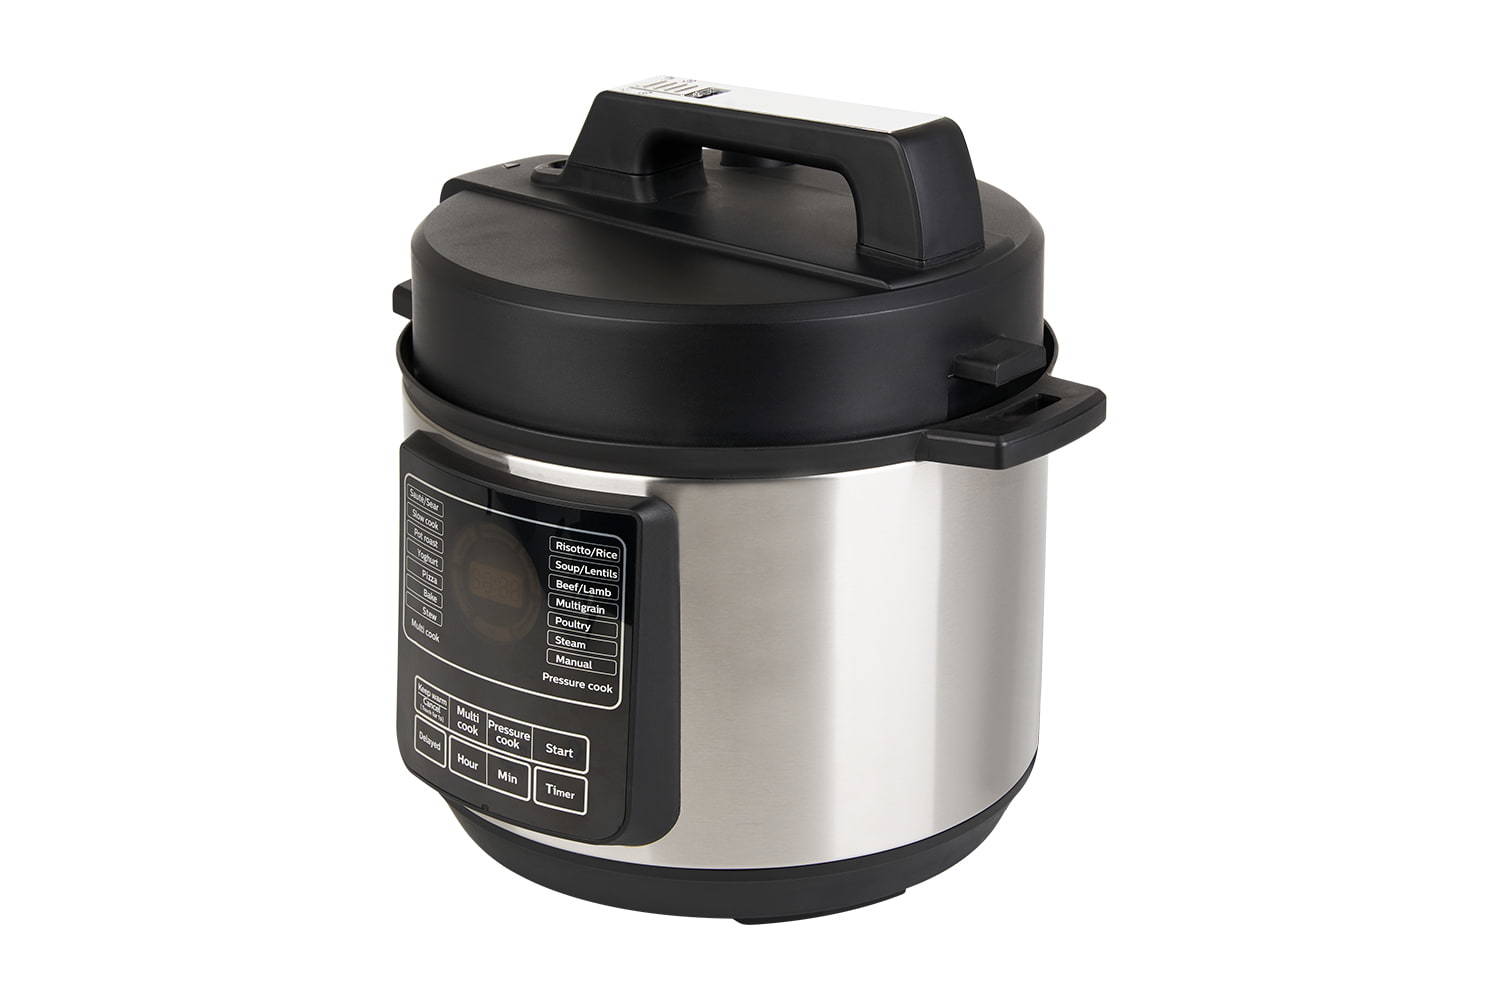 YYY-50CS08 Electric Pressure Cooker, 5L,  Multi-Functional , Stainless Steel